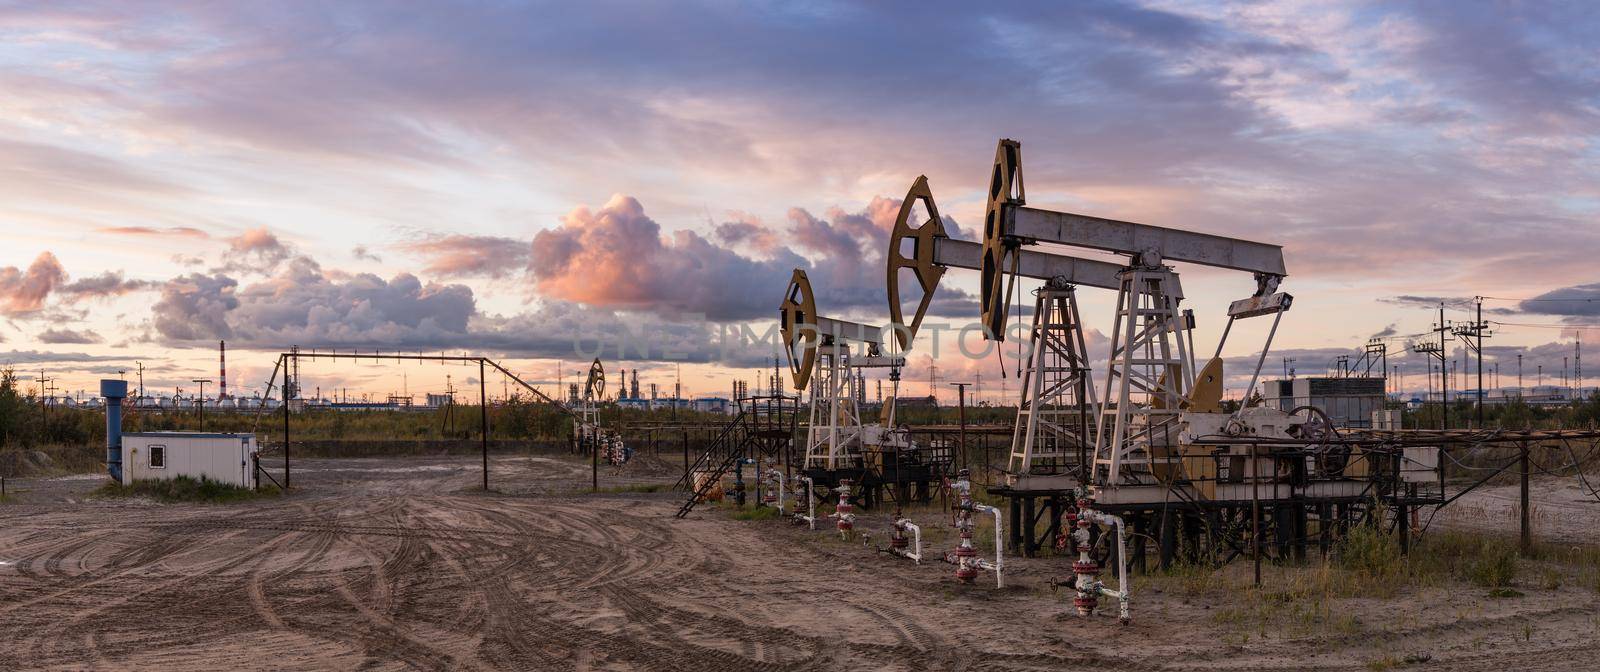 Rocking machines for power genertion. Petroleum concept. Oil and gas industry. Panoramic of a pumpjack and oil refinery. by bashta